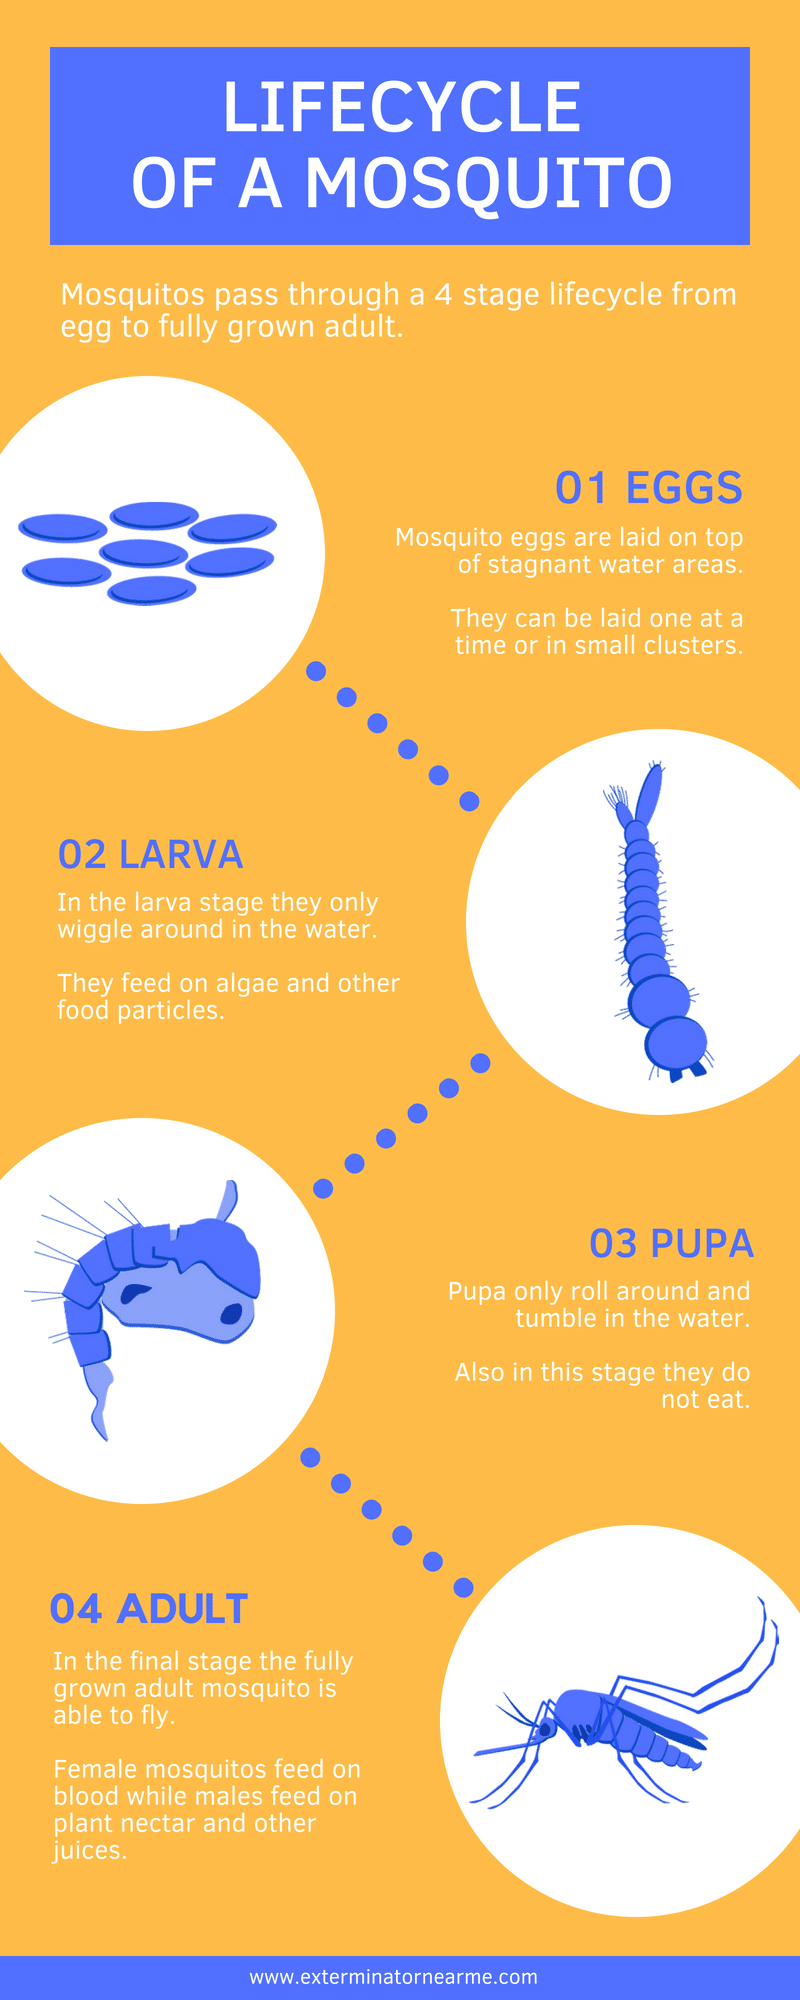 Mosquito Life Cycle (Infographic)